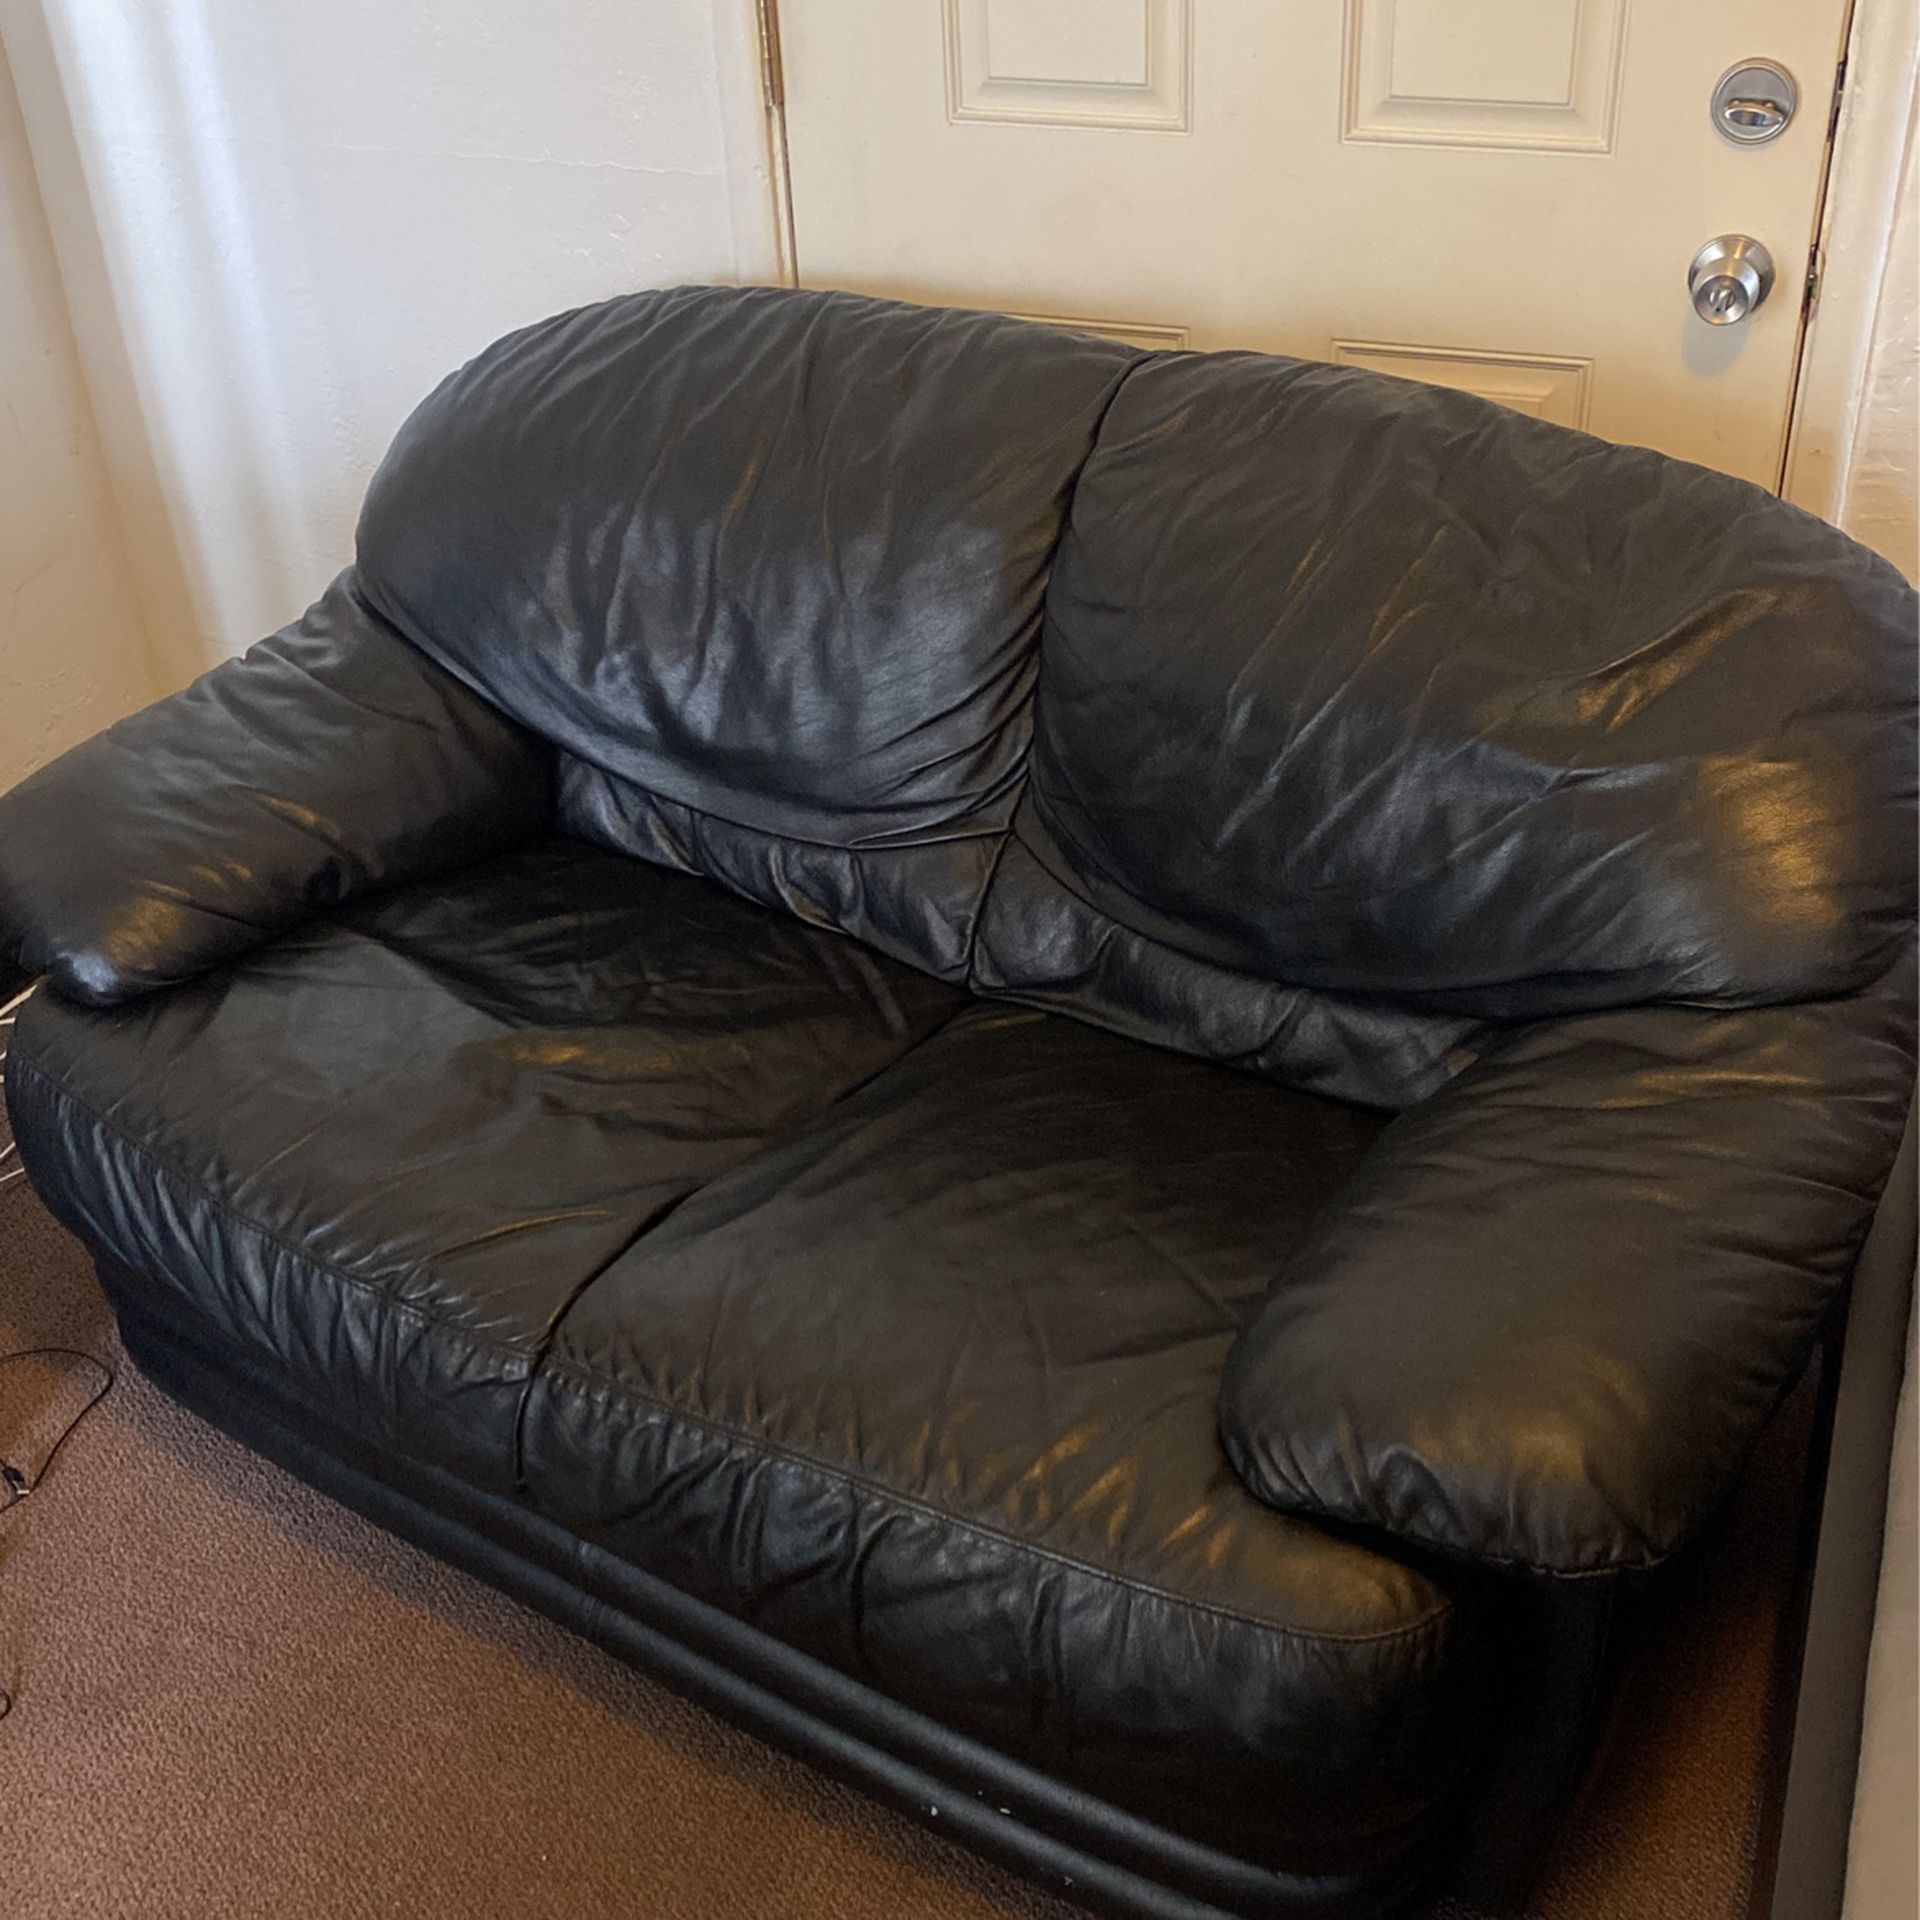 Black Leather Mini Couch